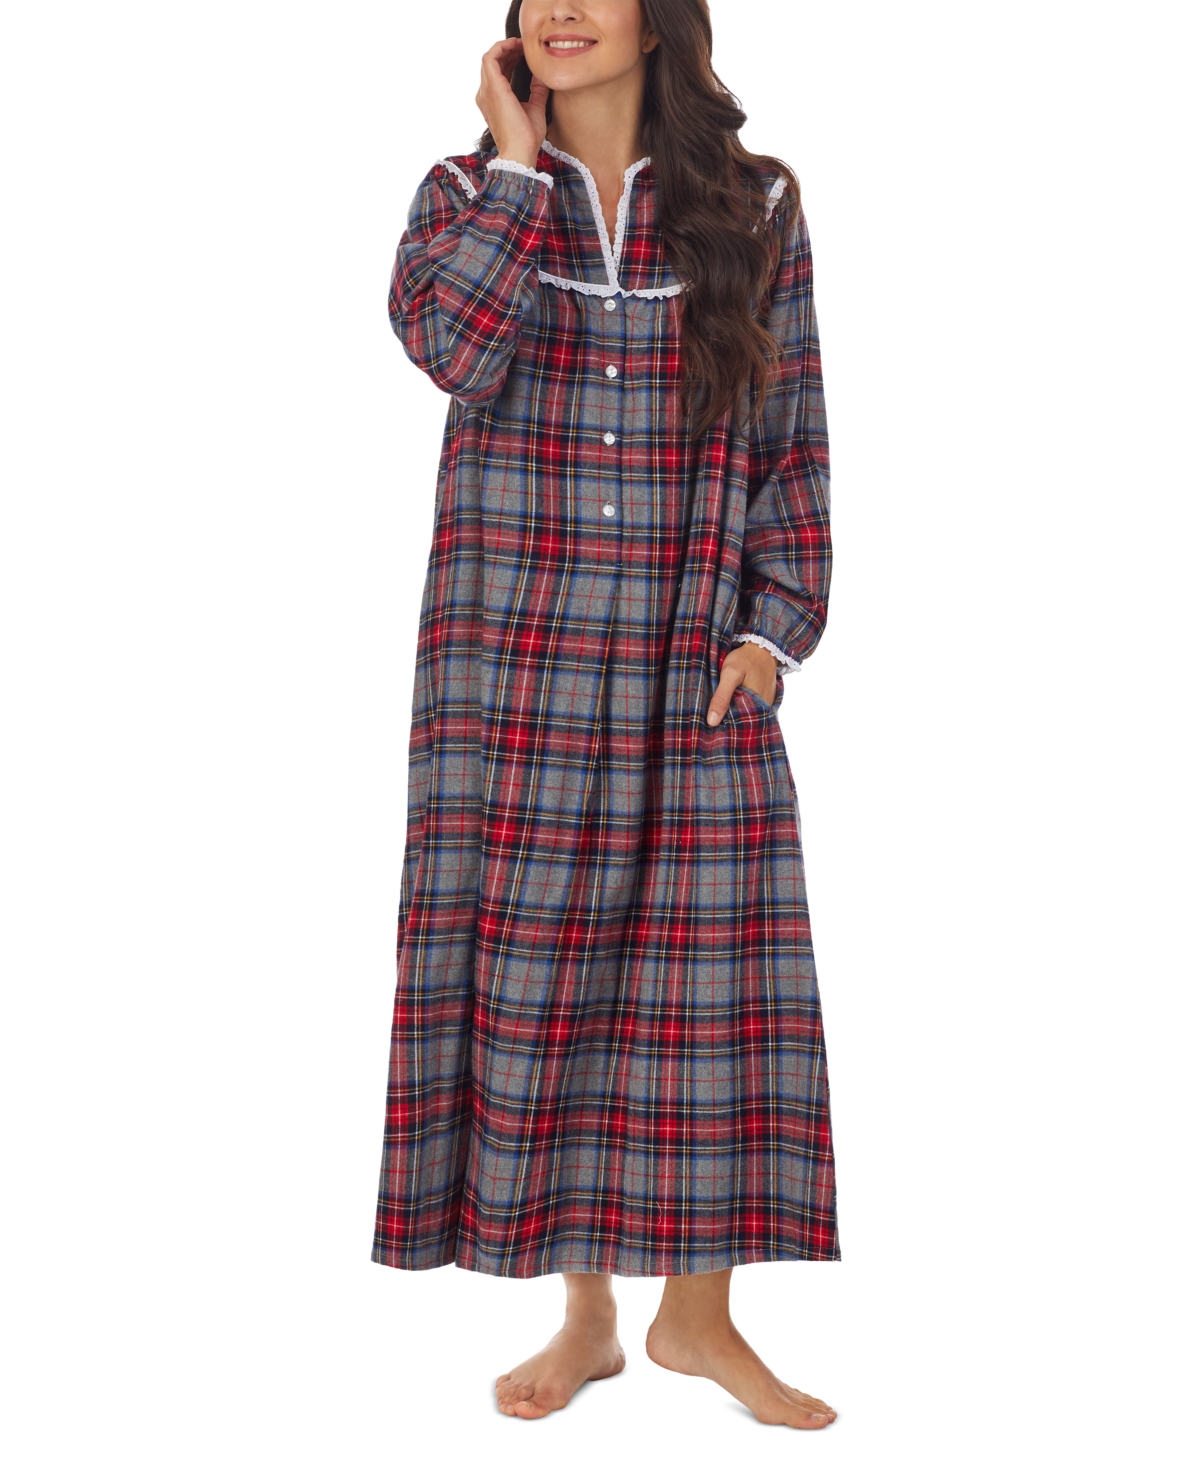 Cotton Lace-Trim Flannel Nightgown - Red Plaid